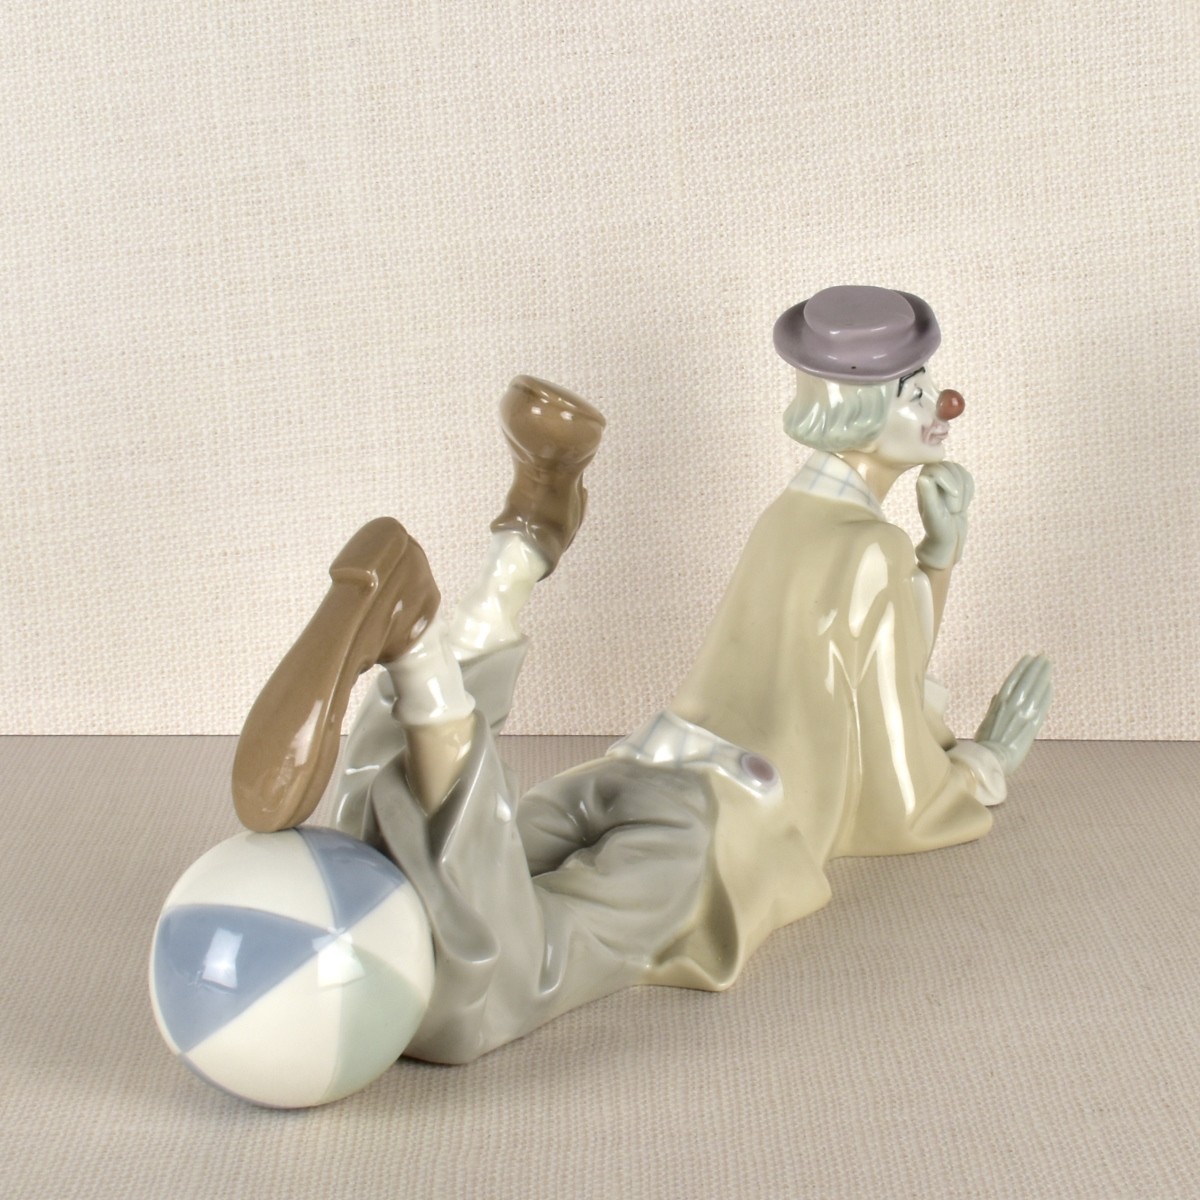 Lladro Figurine of a Clown with a Ball